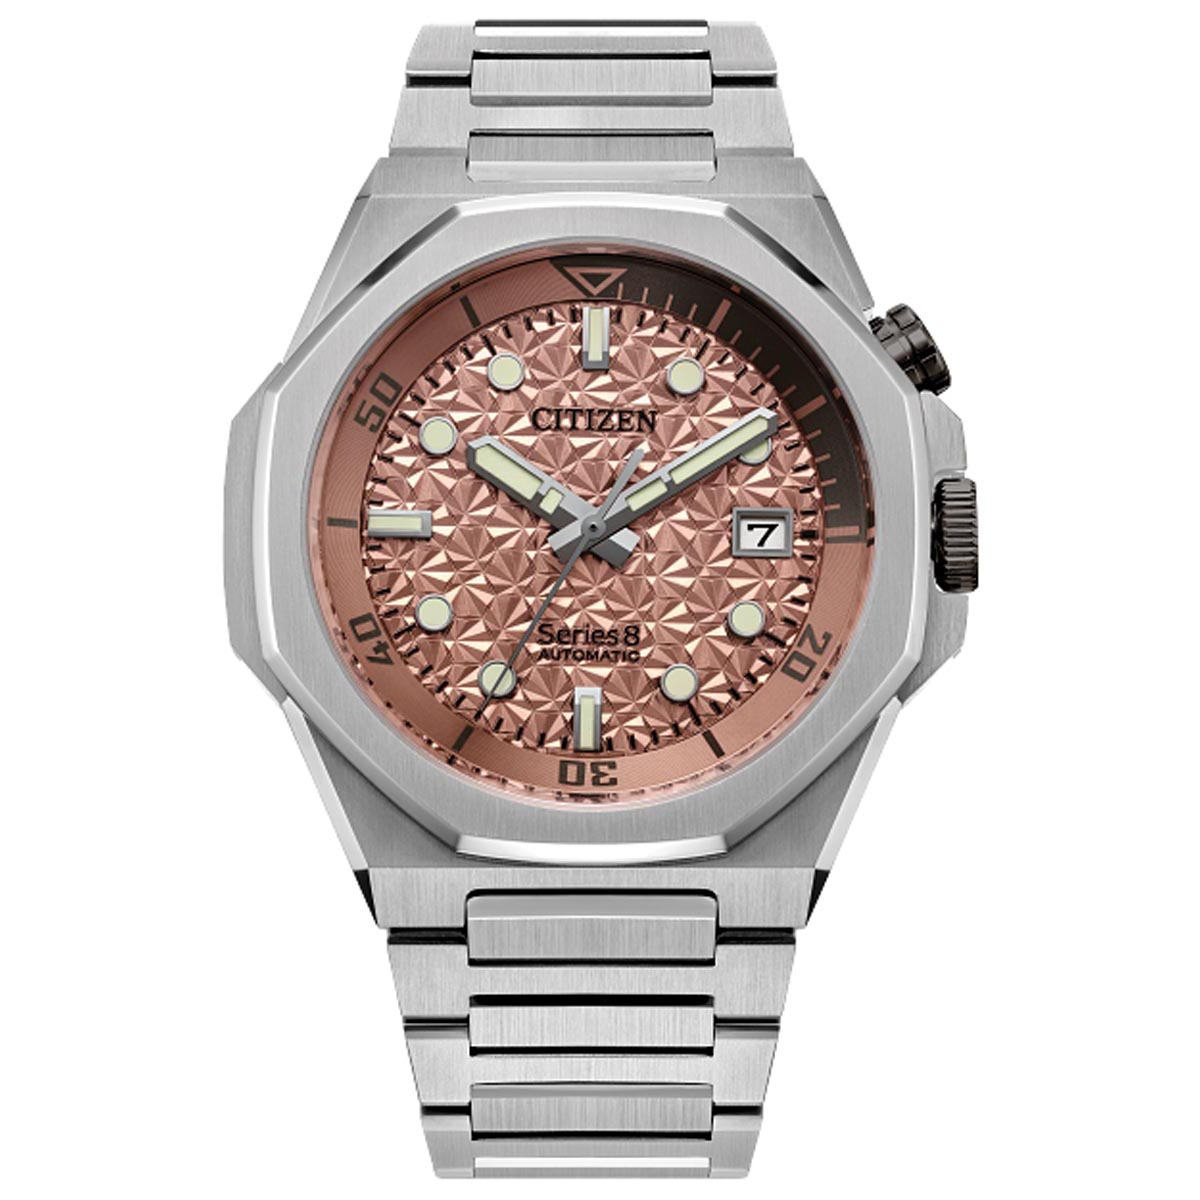 Citizen Series8 890 Mens Watch with Salmon Dial and Stainless Steel Bracelet (automatic movement)